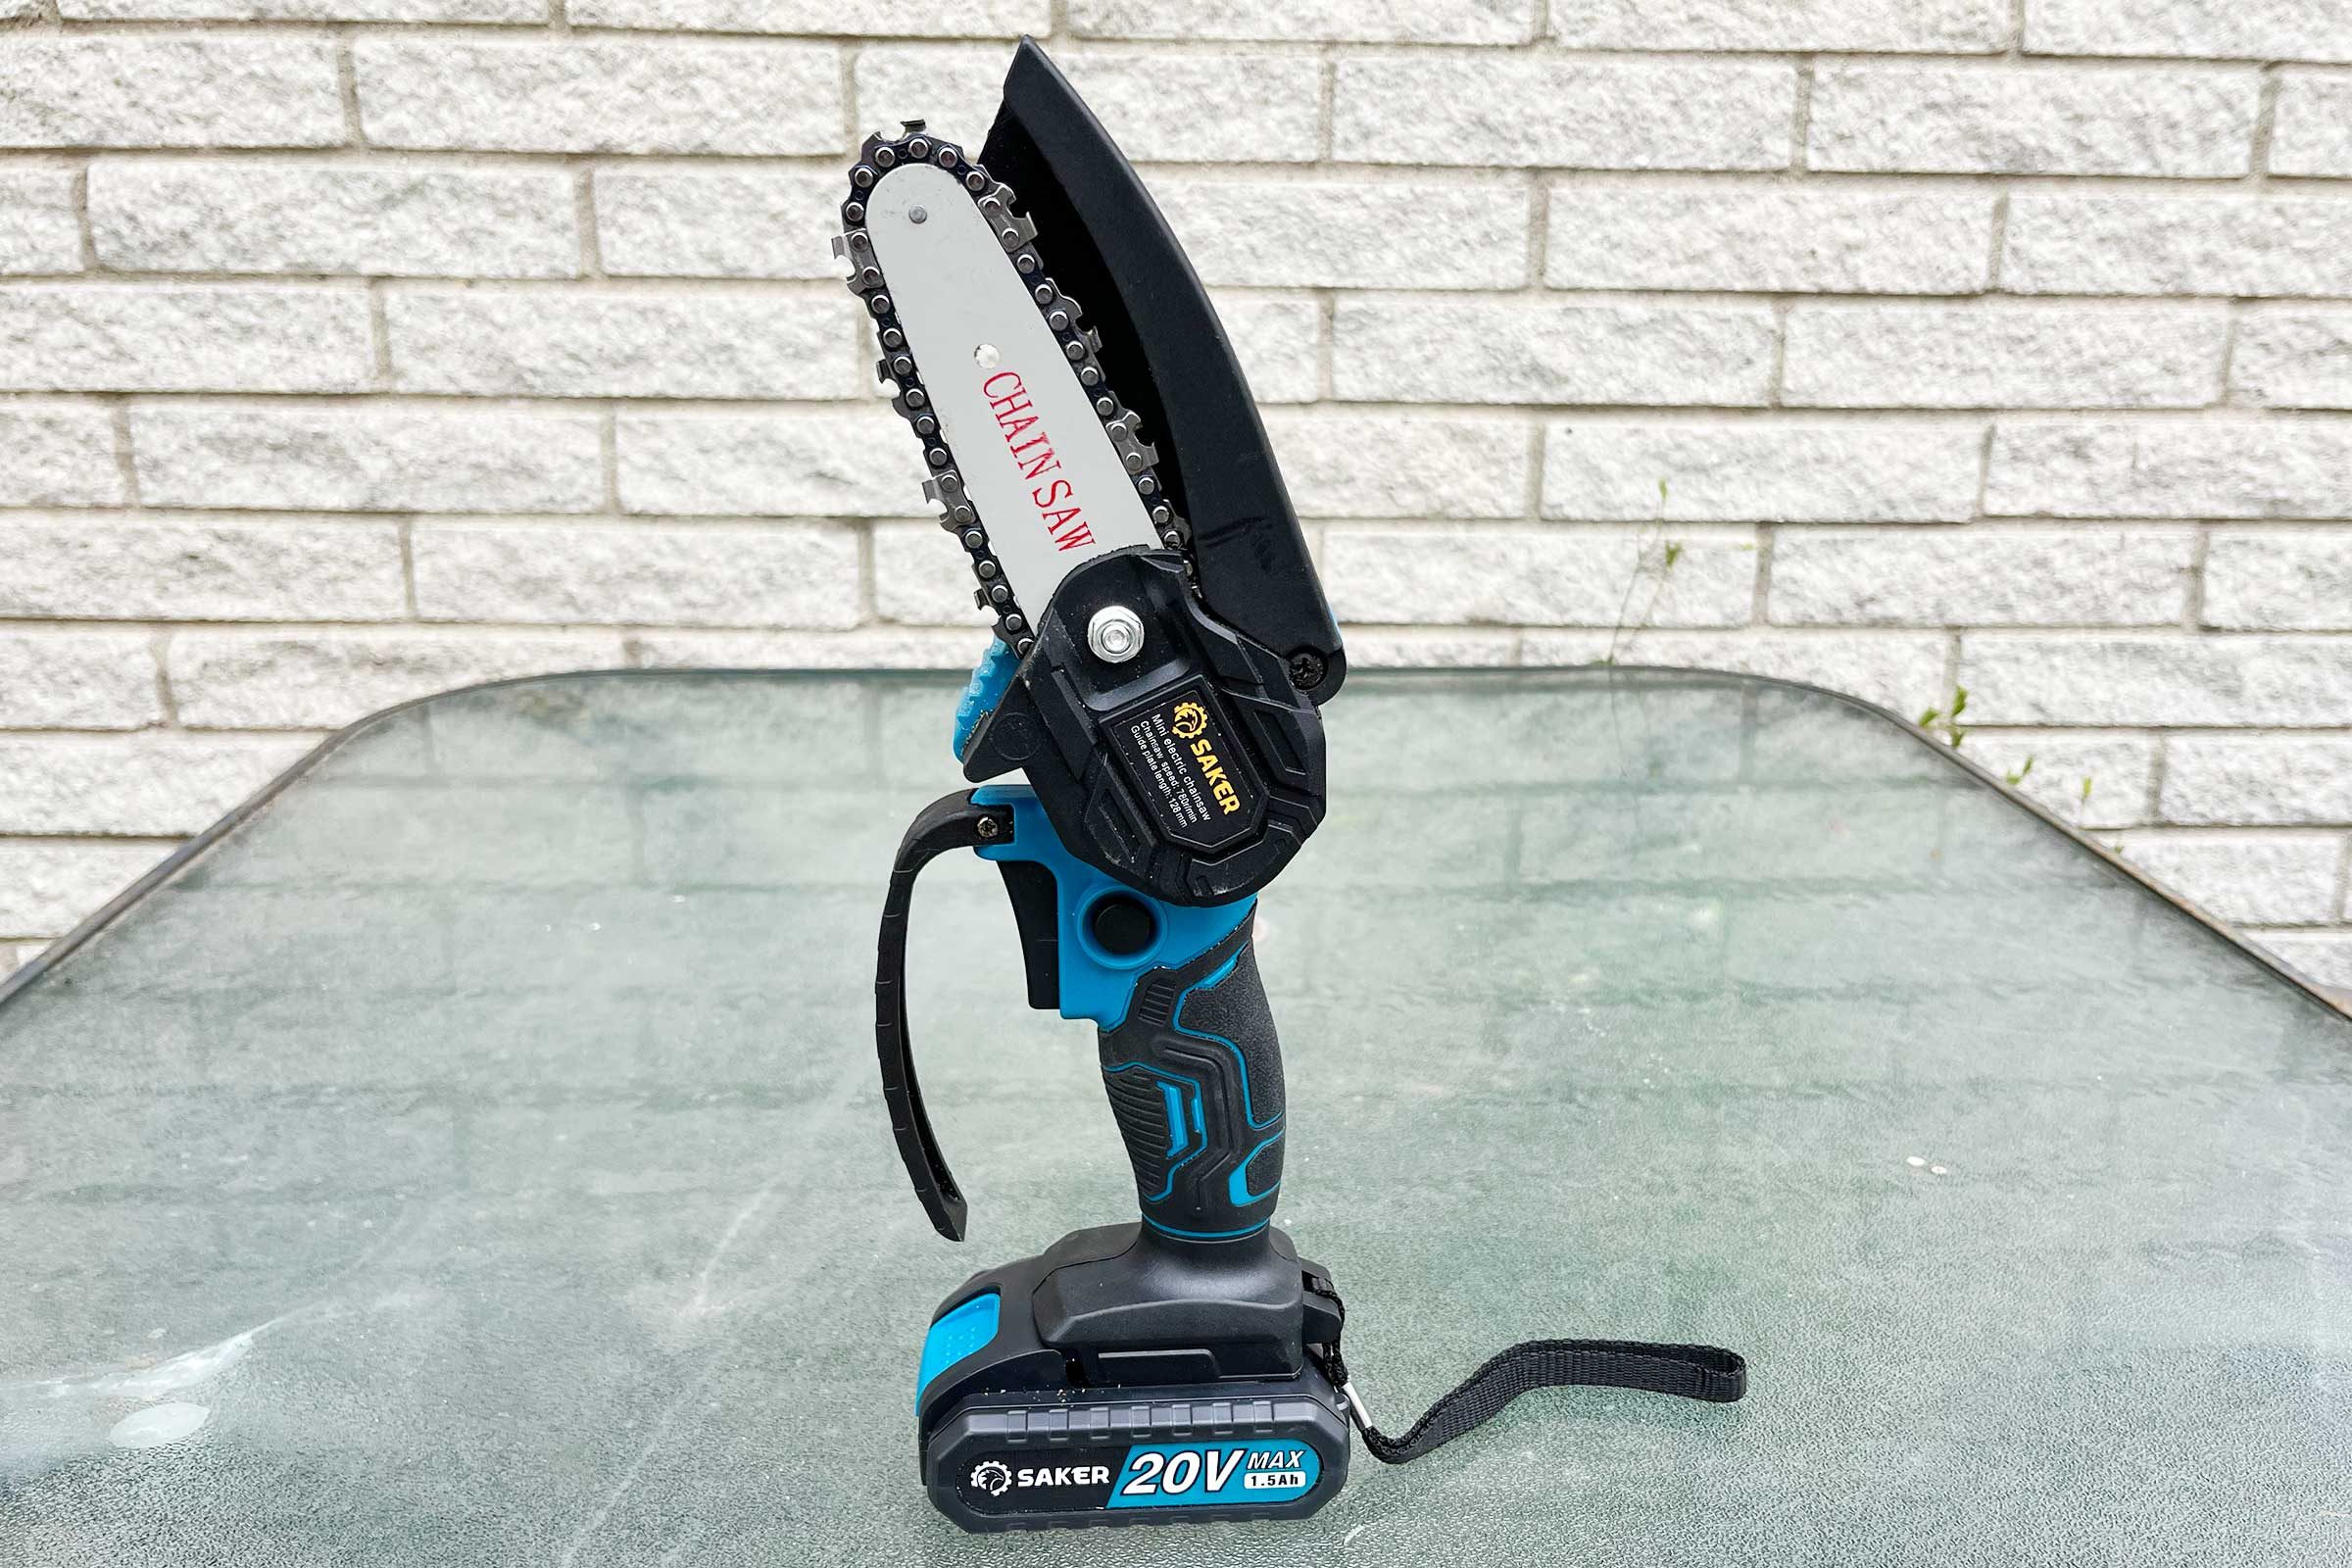 Saker multifunction mini chainsaw review - punches above its weight class -  The Gadgeteer